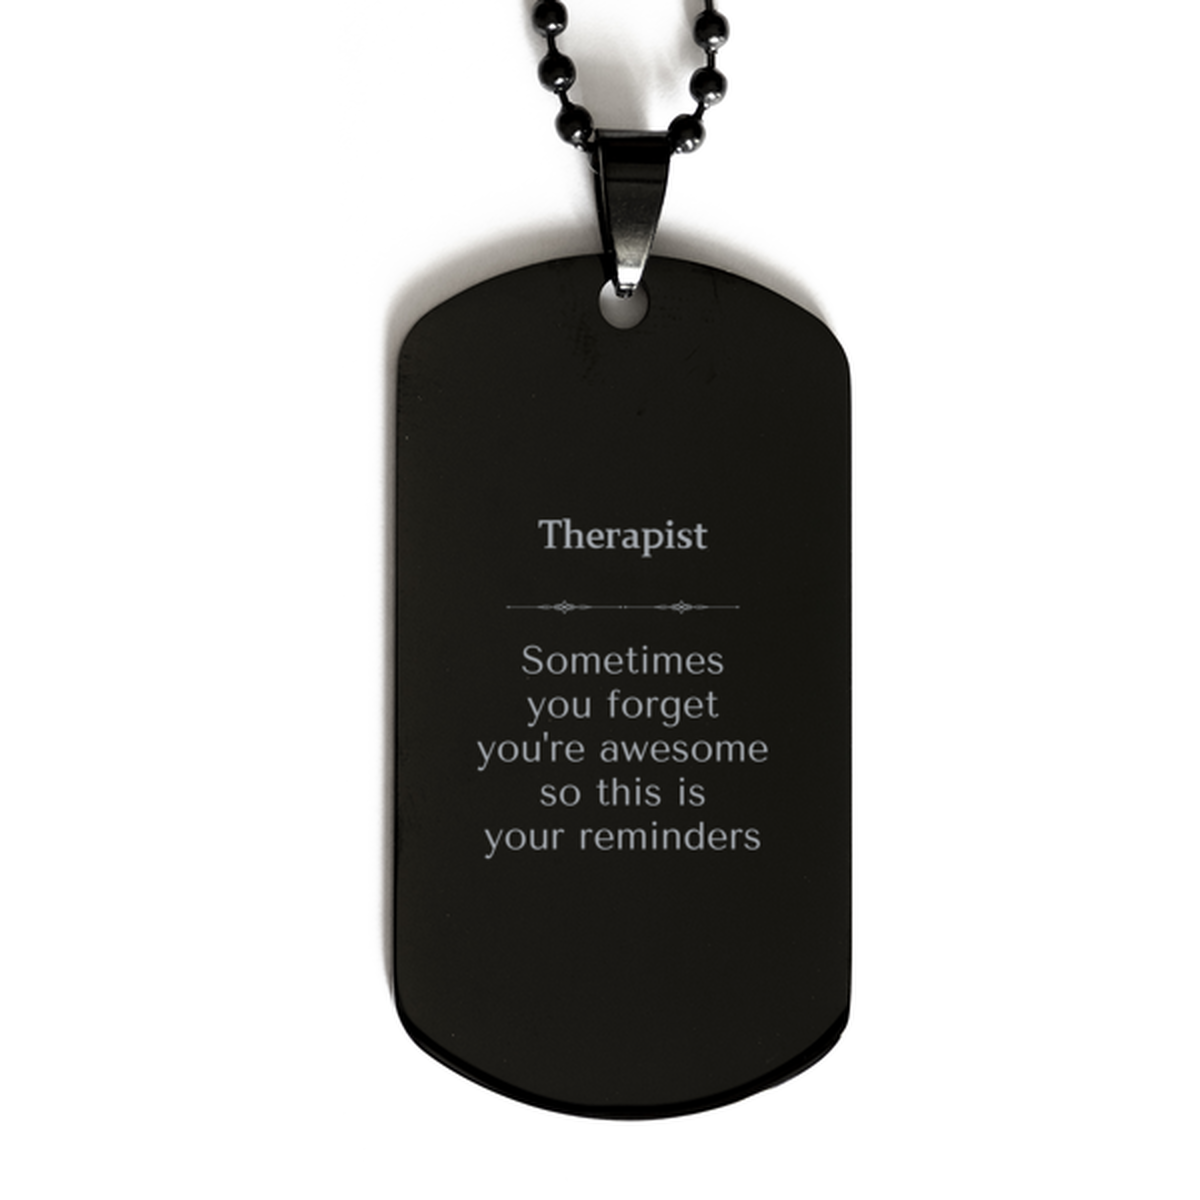 Sentimental Therapist Black Dog Tag, Therapist Sometimes you forget you're awesome so this is your reminders, Graduation Christmas Birthday Gifts for Therapist, Men, Women, Coworkers